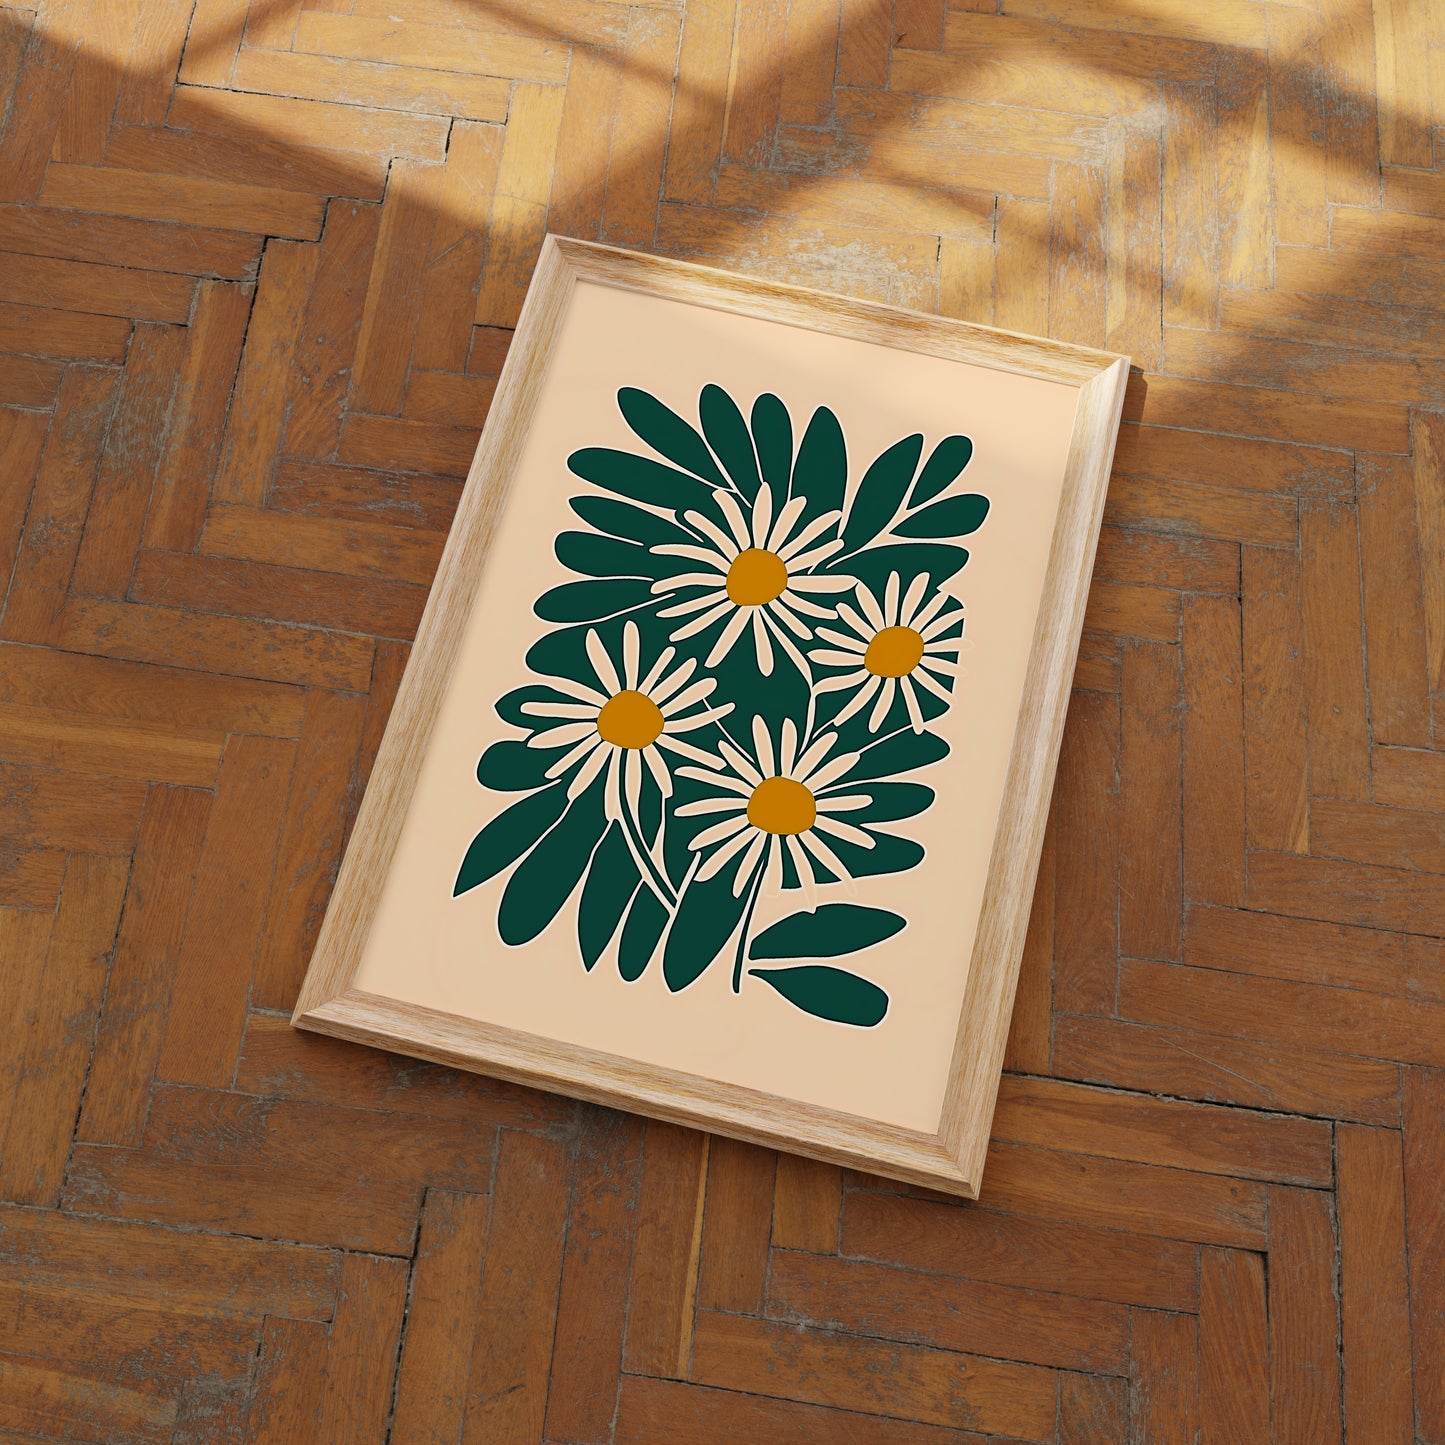 A framed picture of a floral design on a wooden floor.